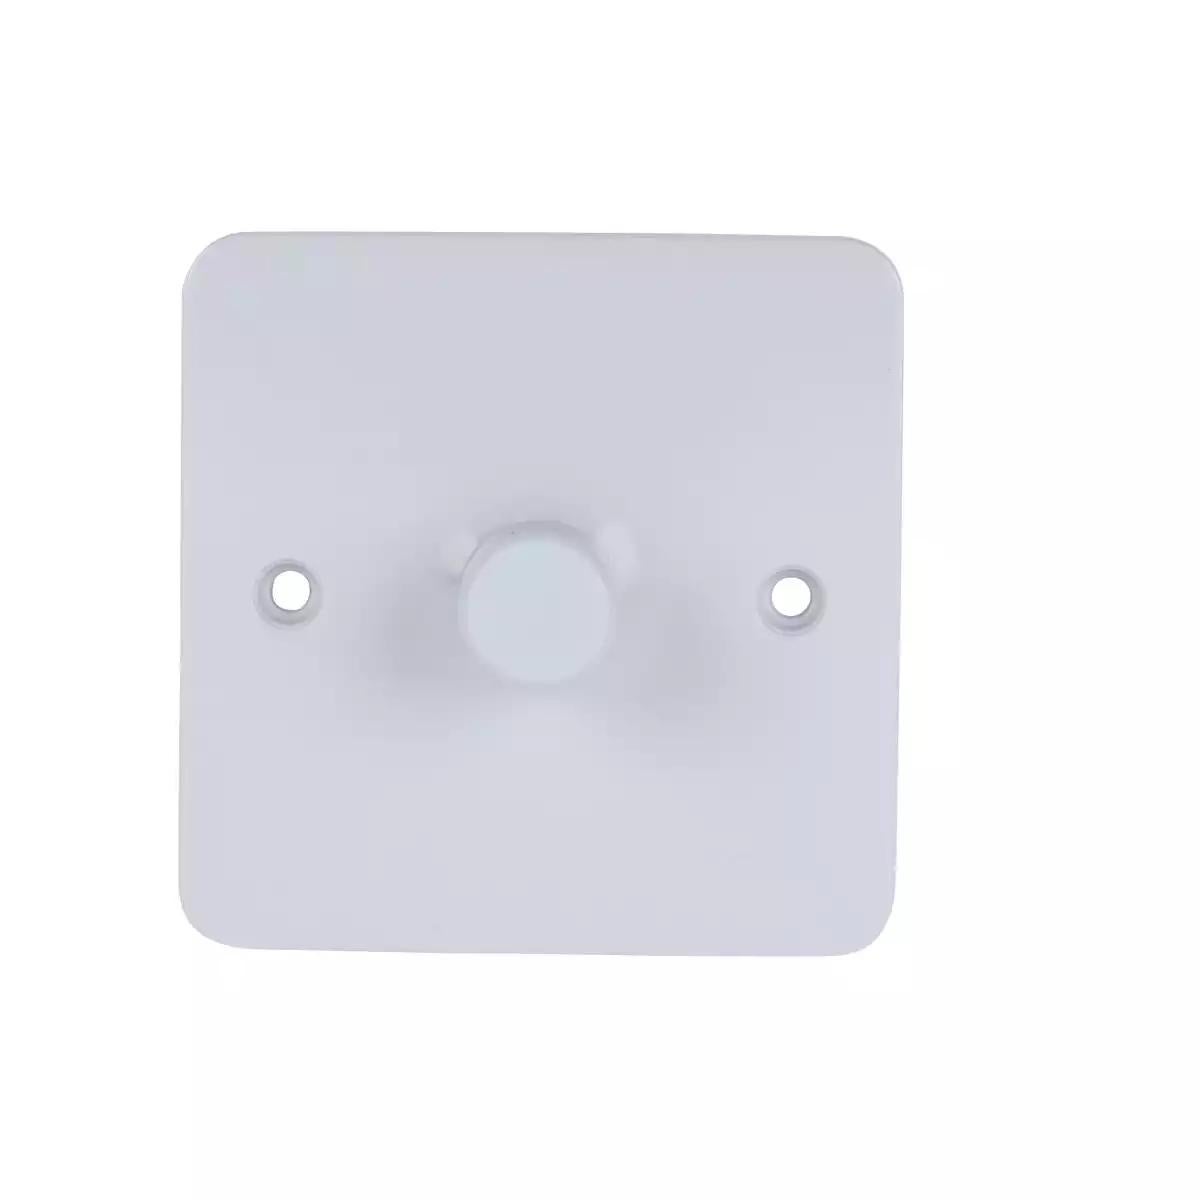 Lisse - universal dimmer - 1 gang - 2 way - LED - 100W